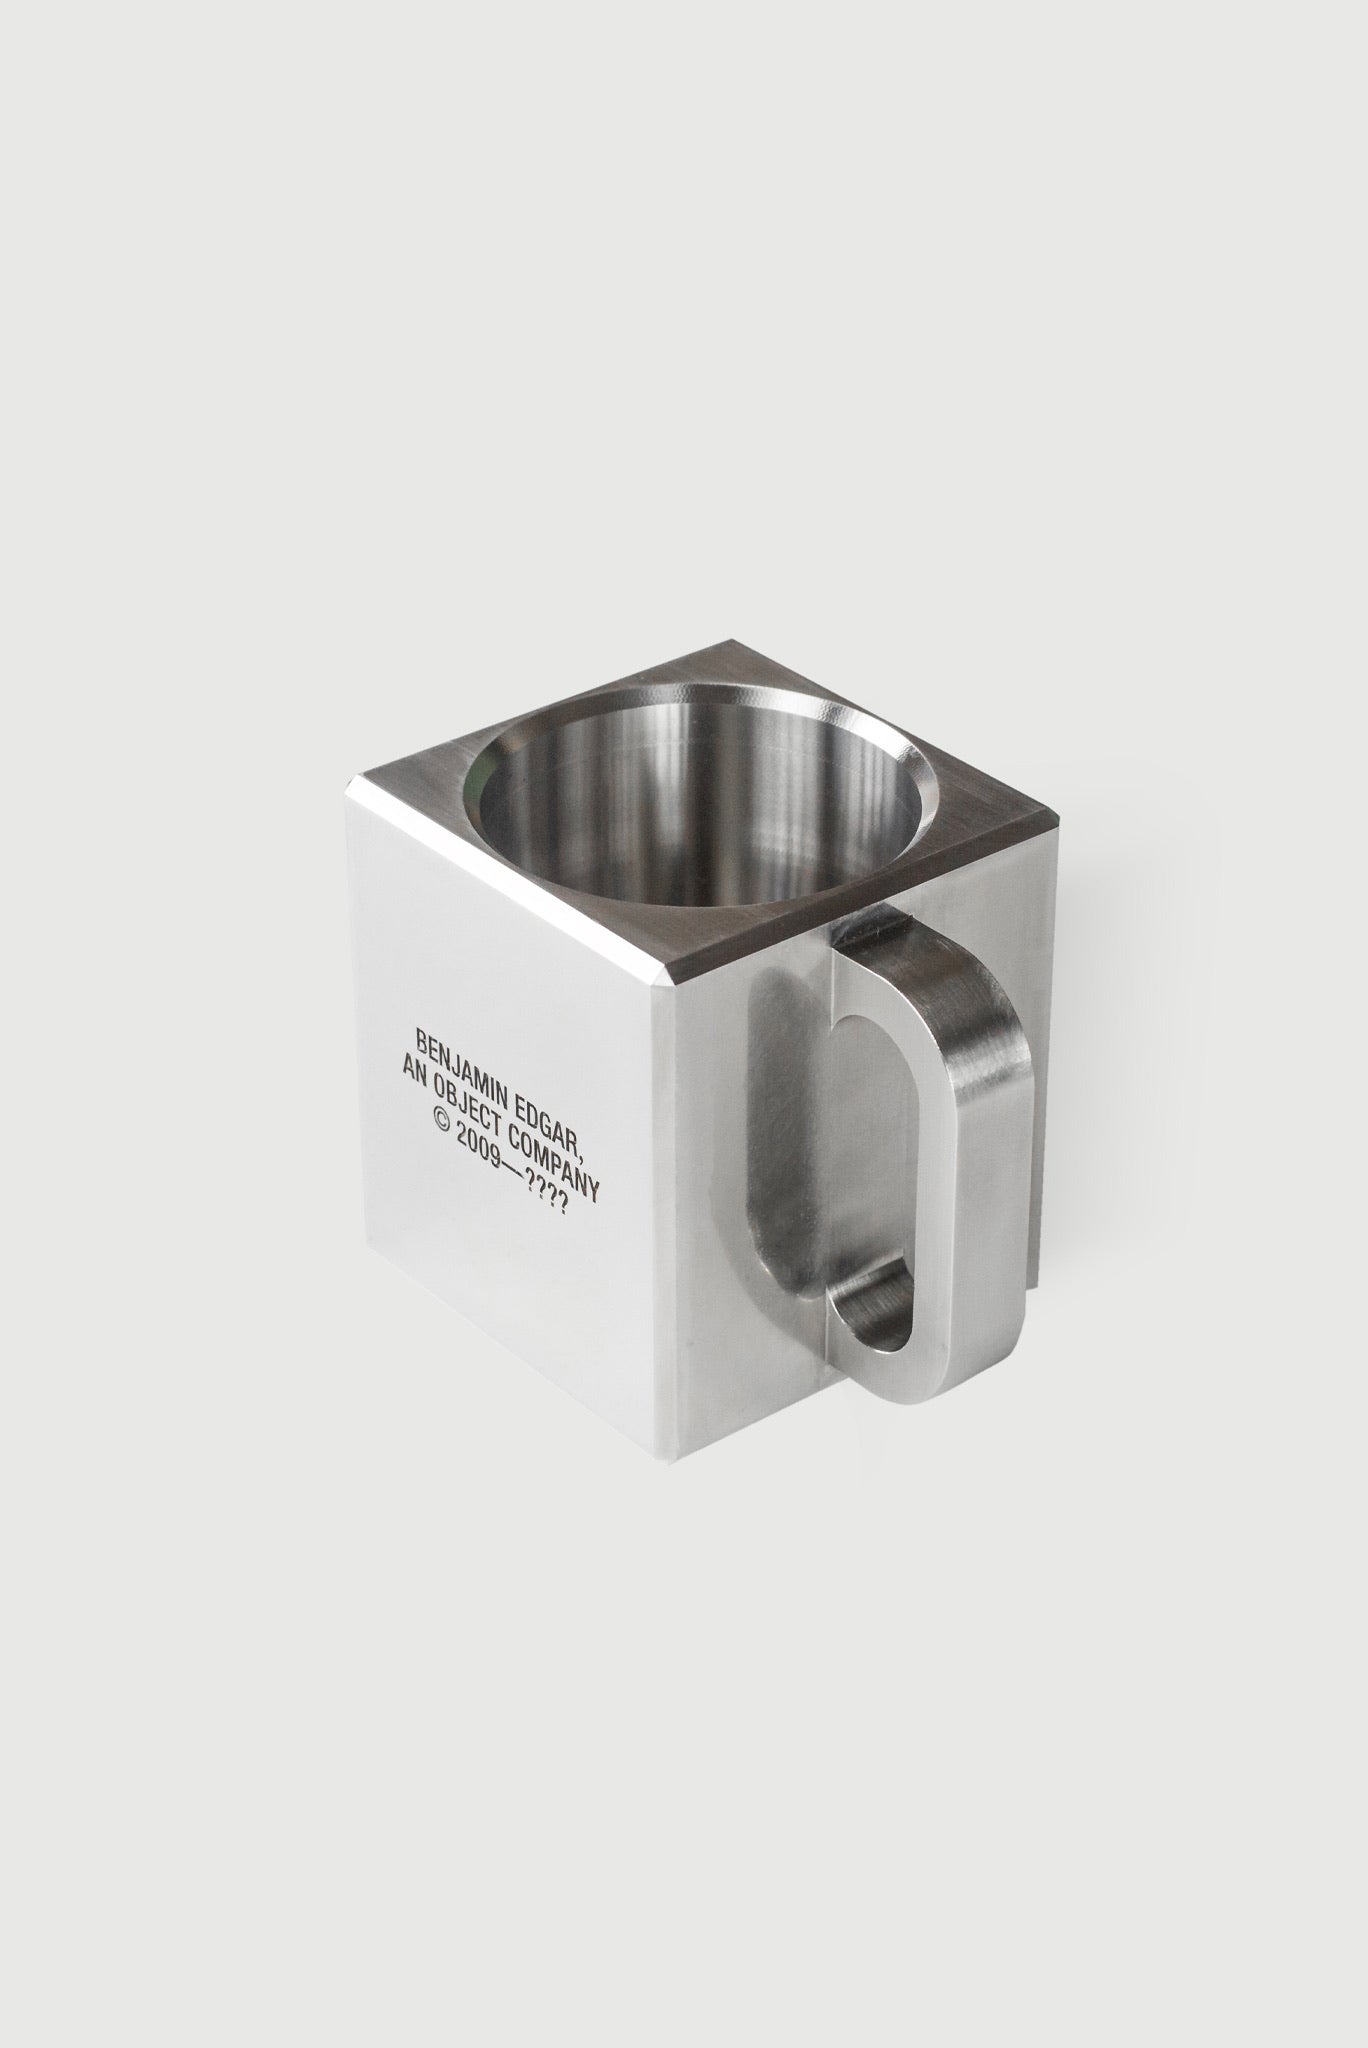 Stainless Steel Coffee Cup – BENJAMIN EDGAR, object company.